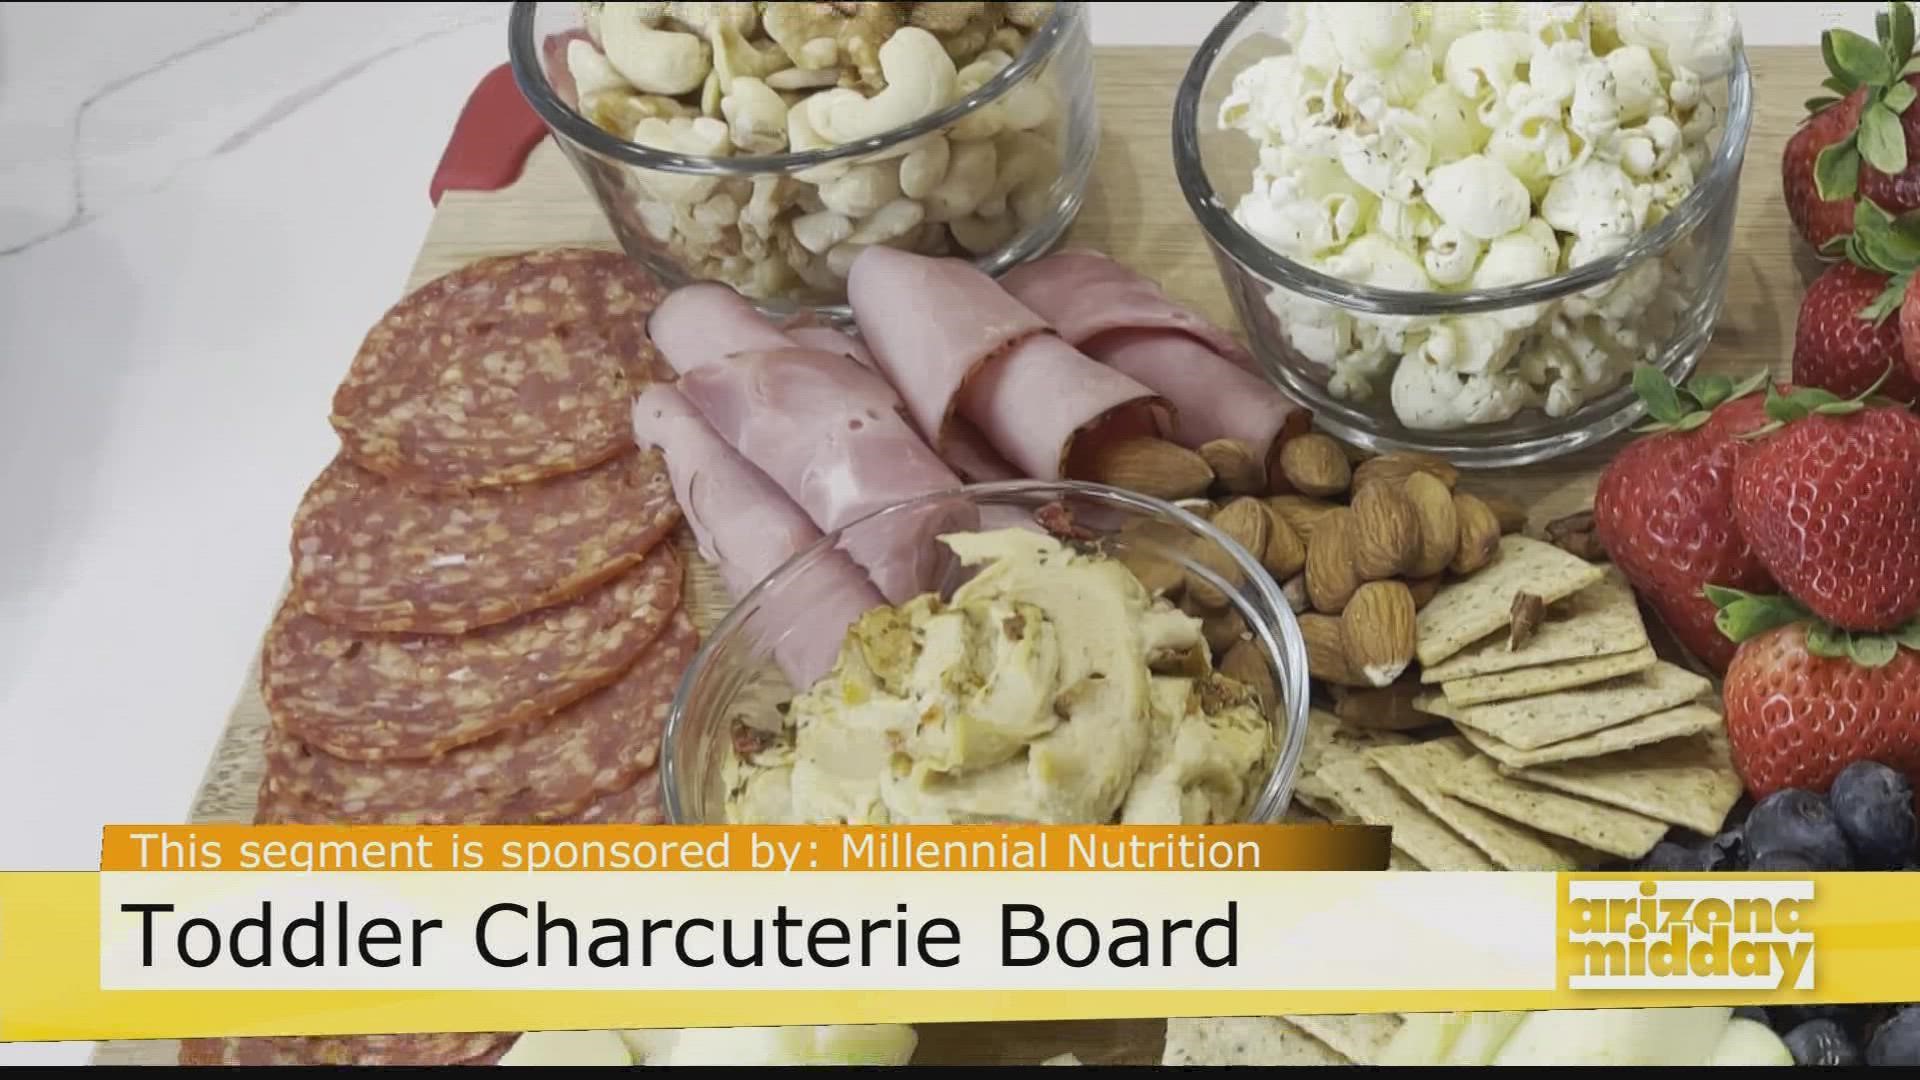 Gillean Barkyoumb, Registered Dietitian, shares her tips on create fun & delicious toddler charcuterie boards